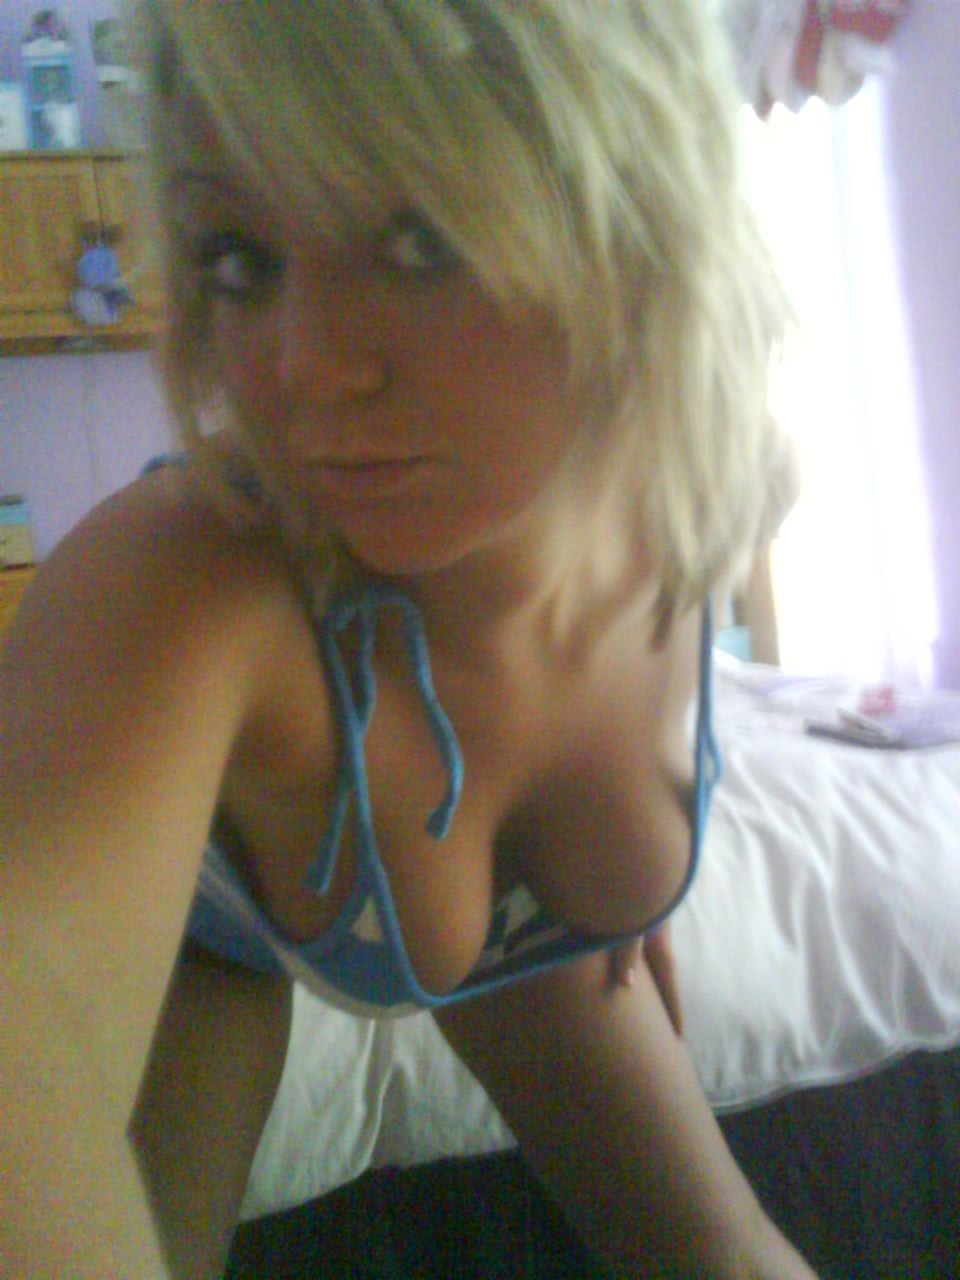 Blonde takes a selfshot of her decolletage